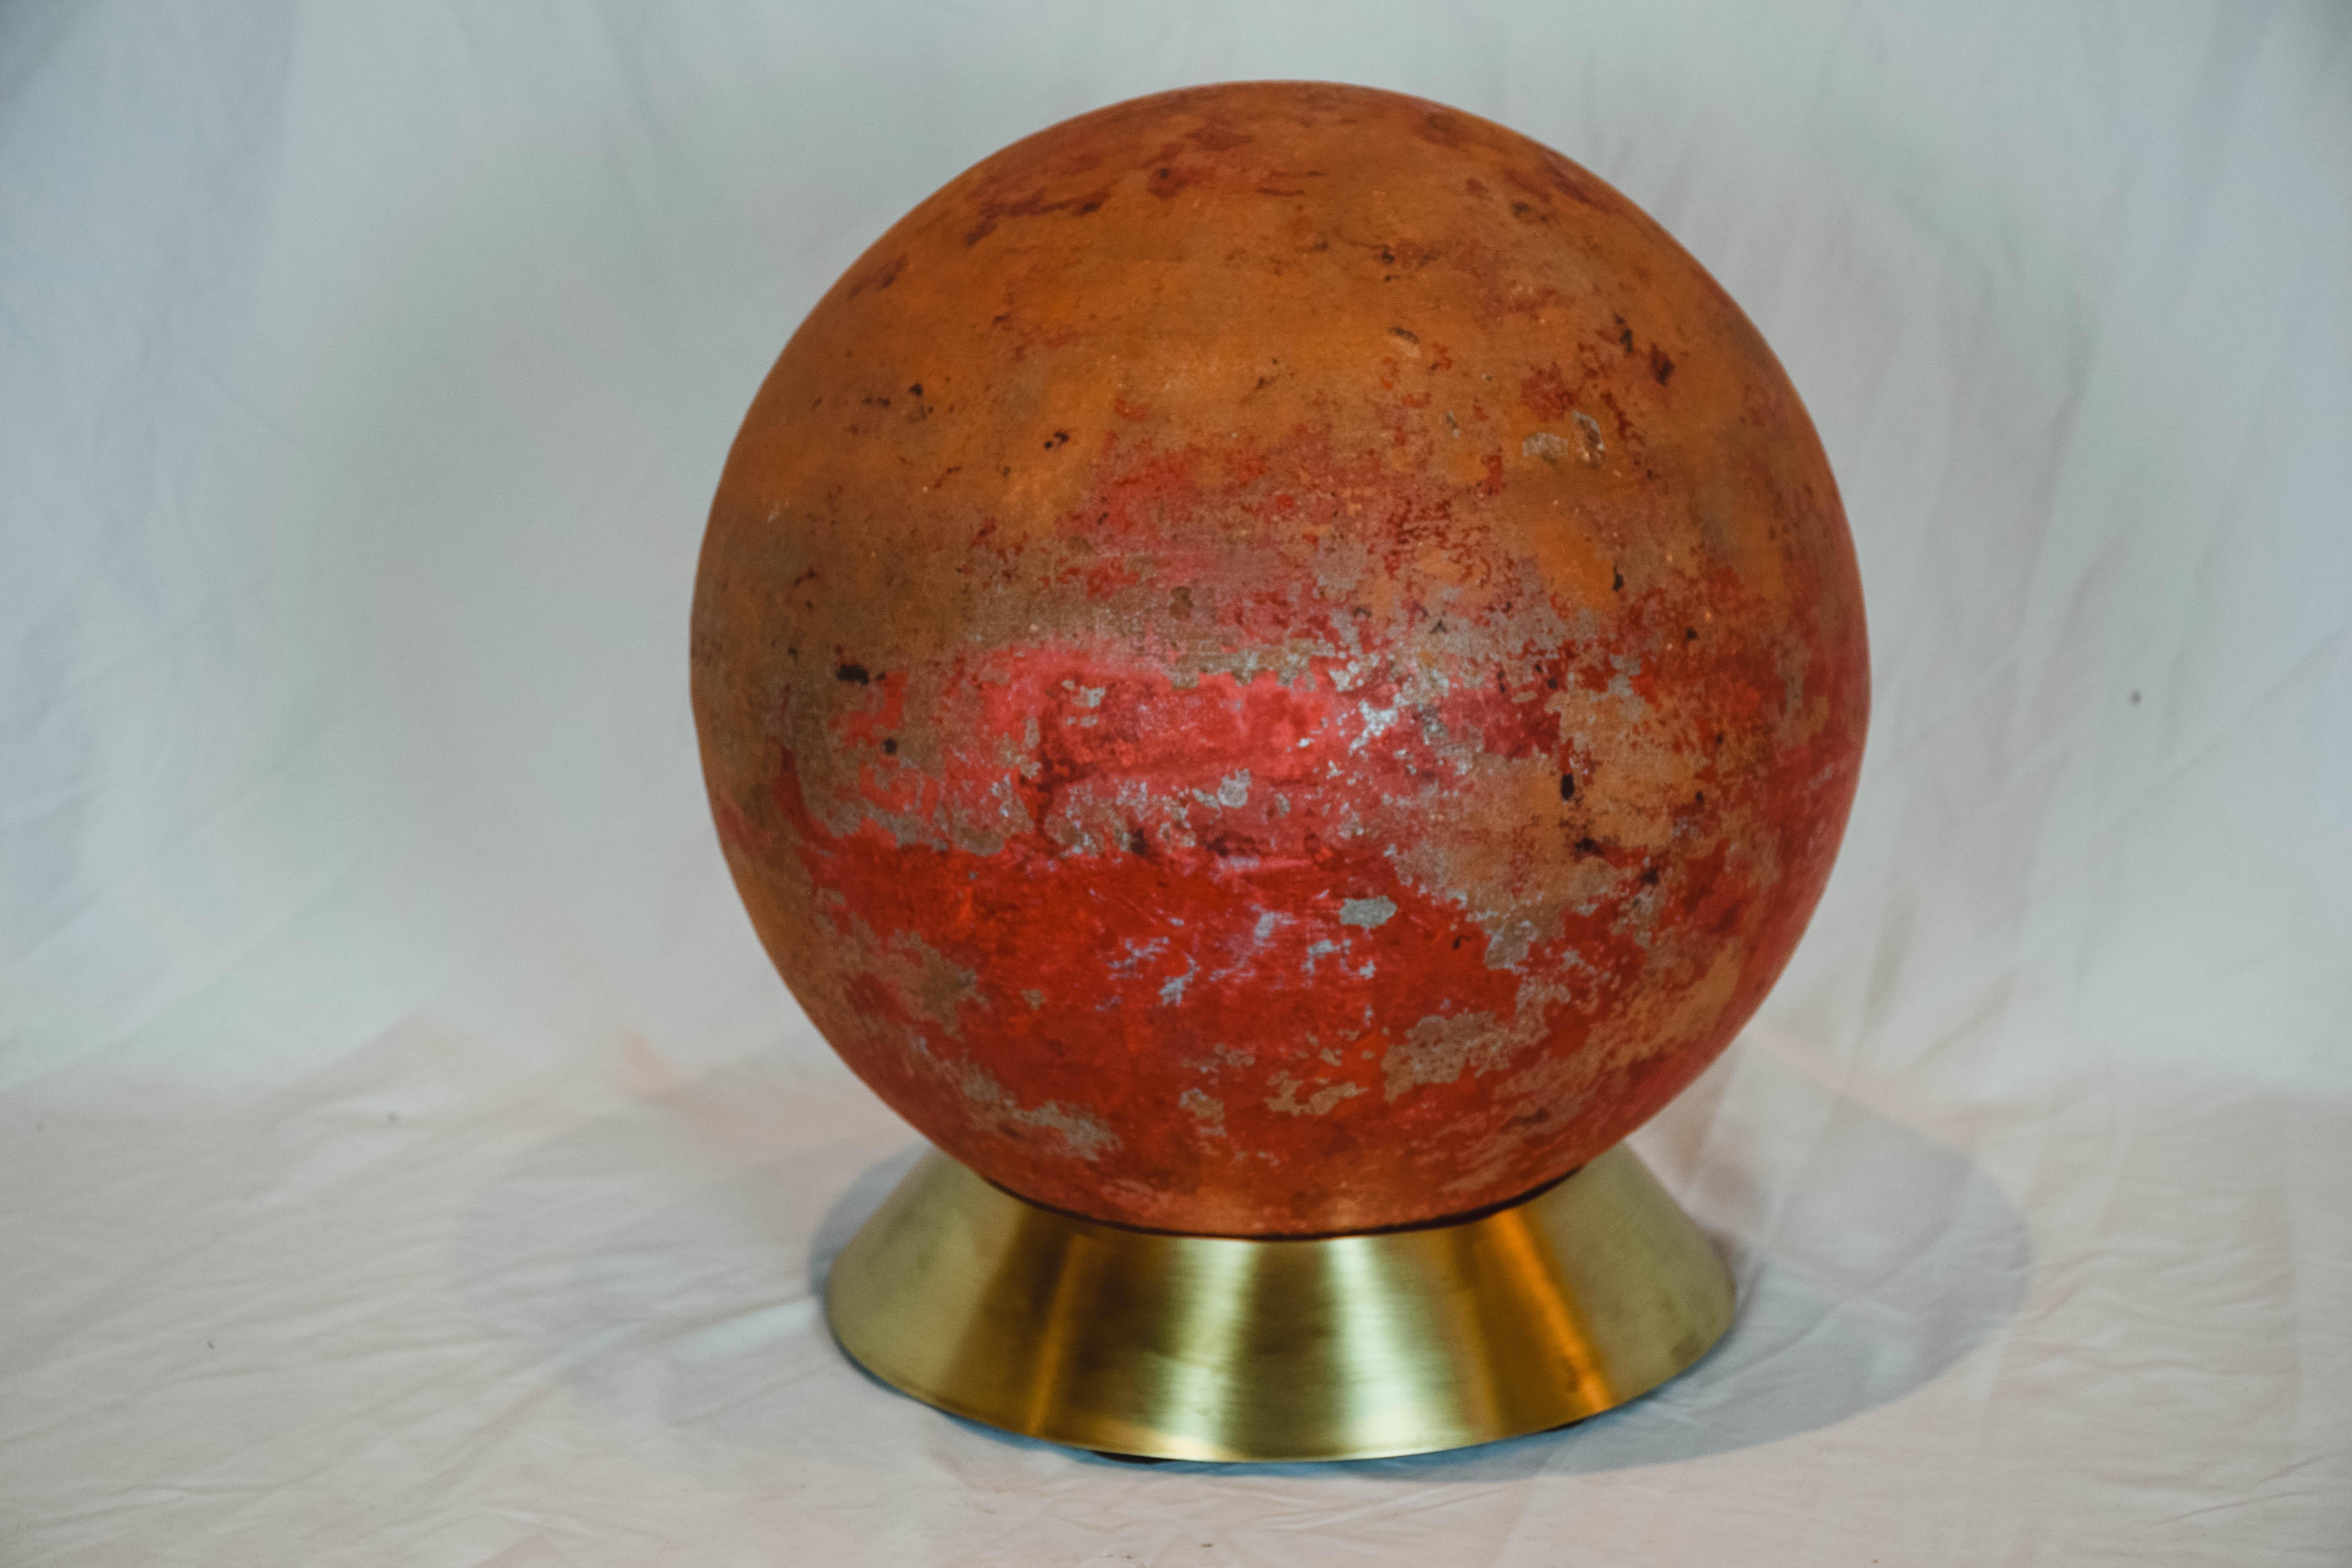 This concrete garden ball on brass base has a beautiful weathered painted red surface, offers a simple, albeit exciting, accessory that is suitable for indoors or outdoors. Any space can be transformed with this garden ball to add a dot of color. We